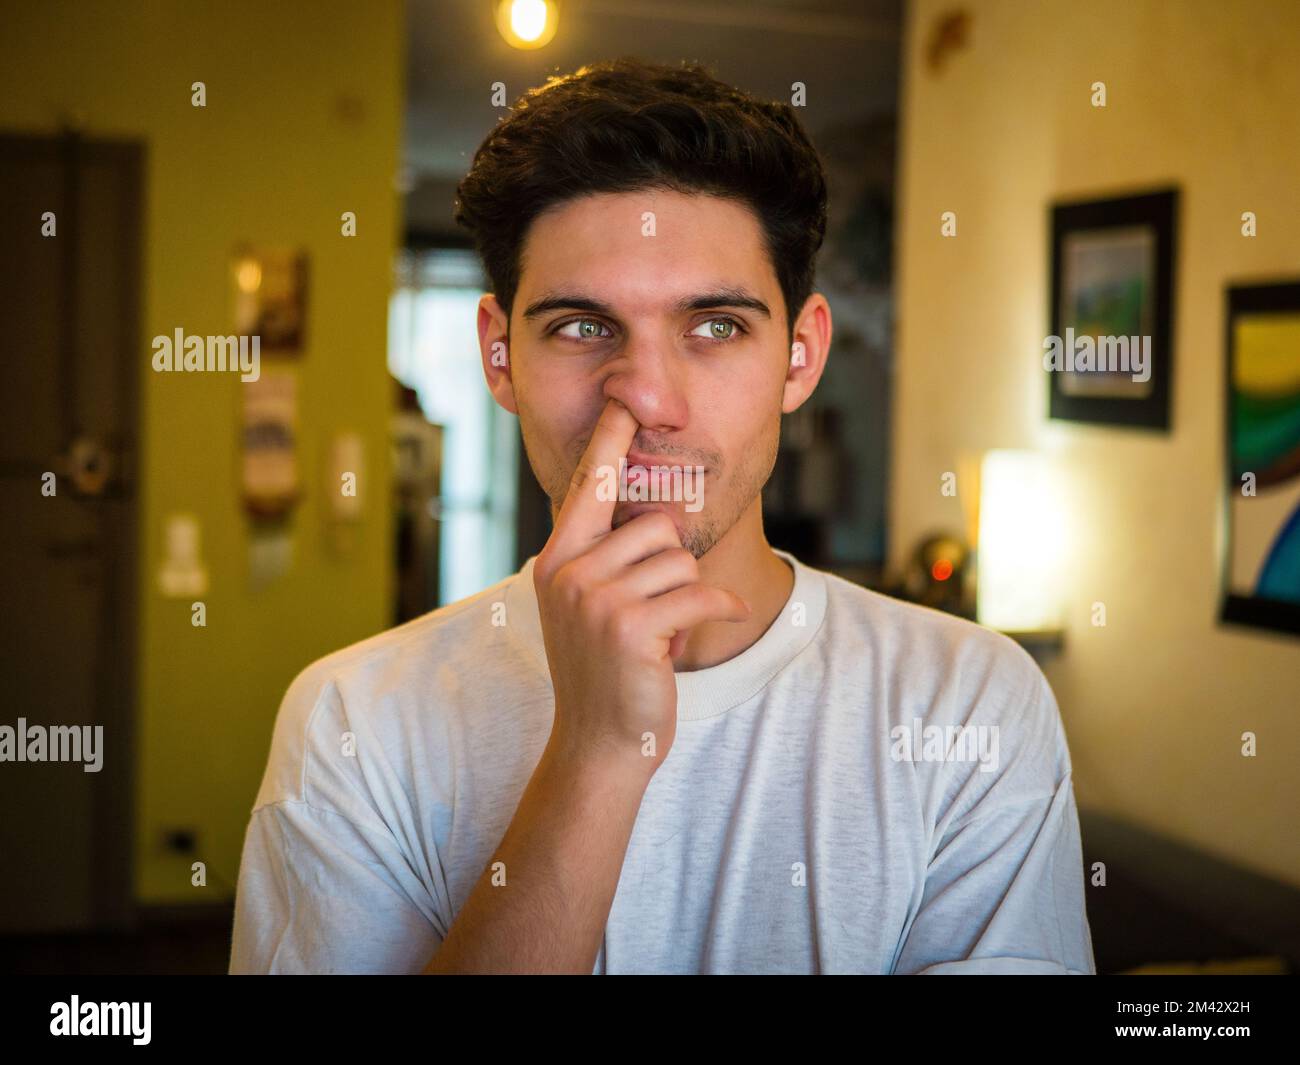 Handsome young man frowning and picking nose Stock Photo